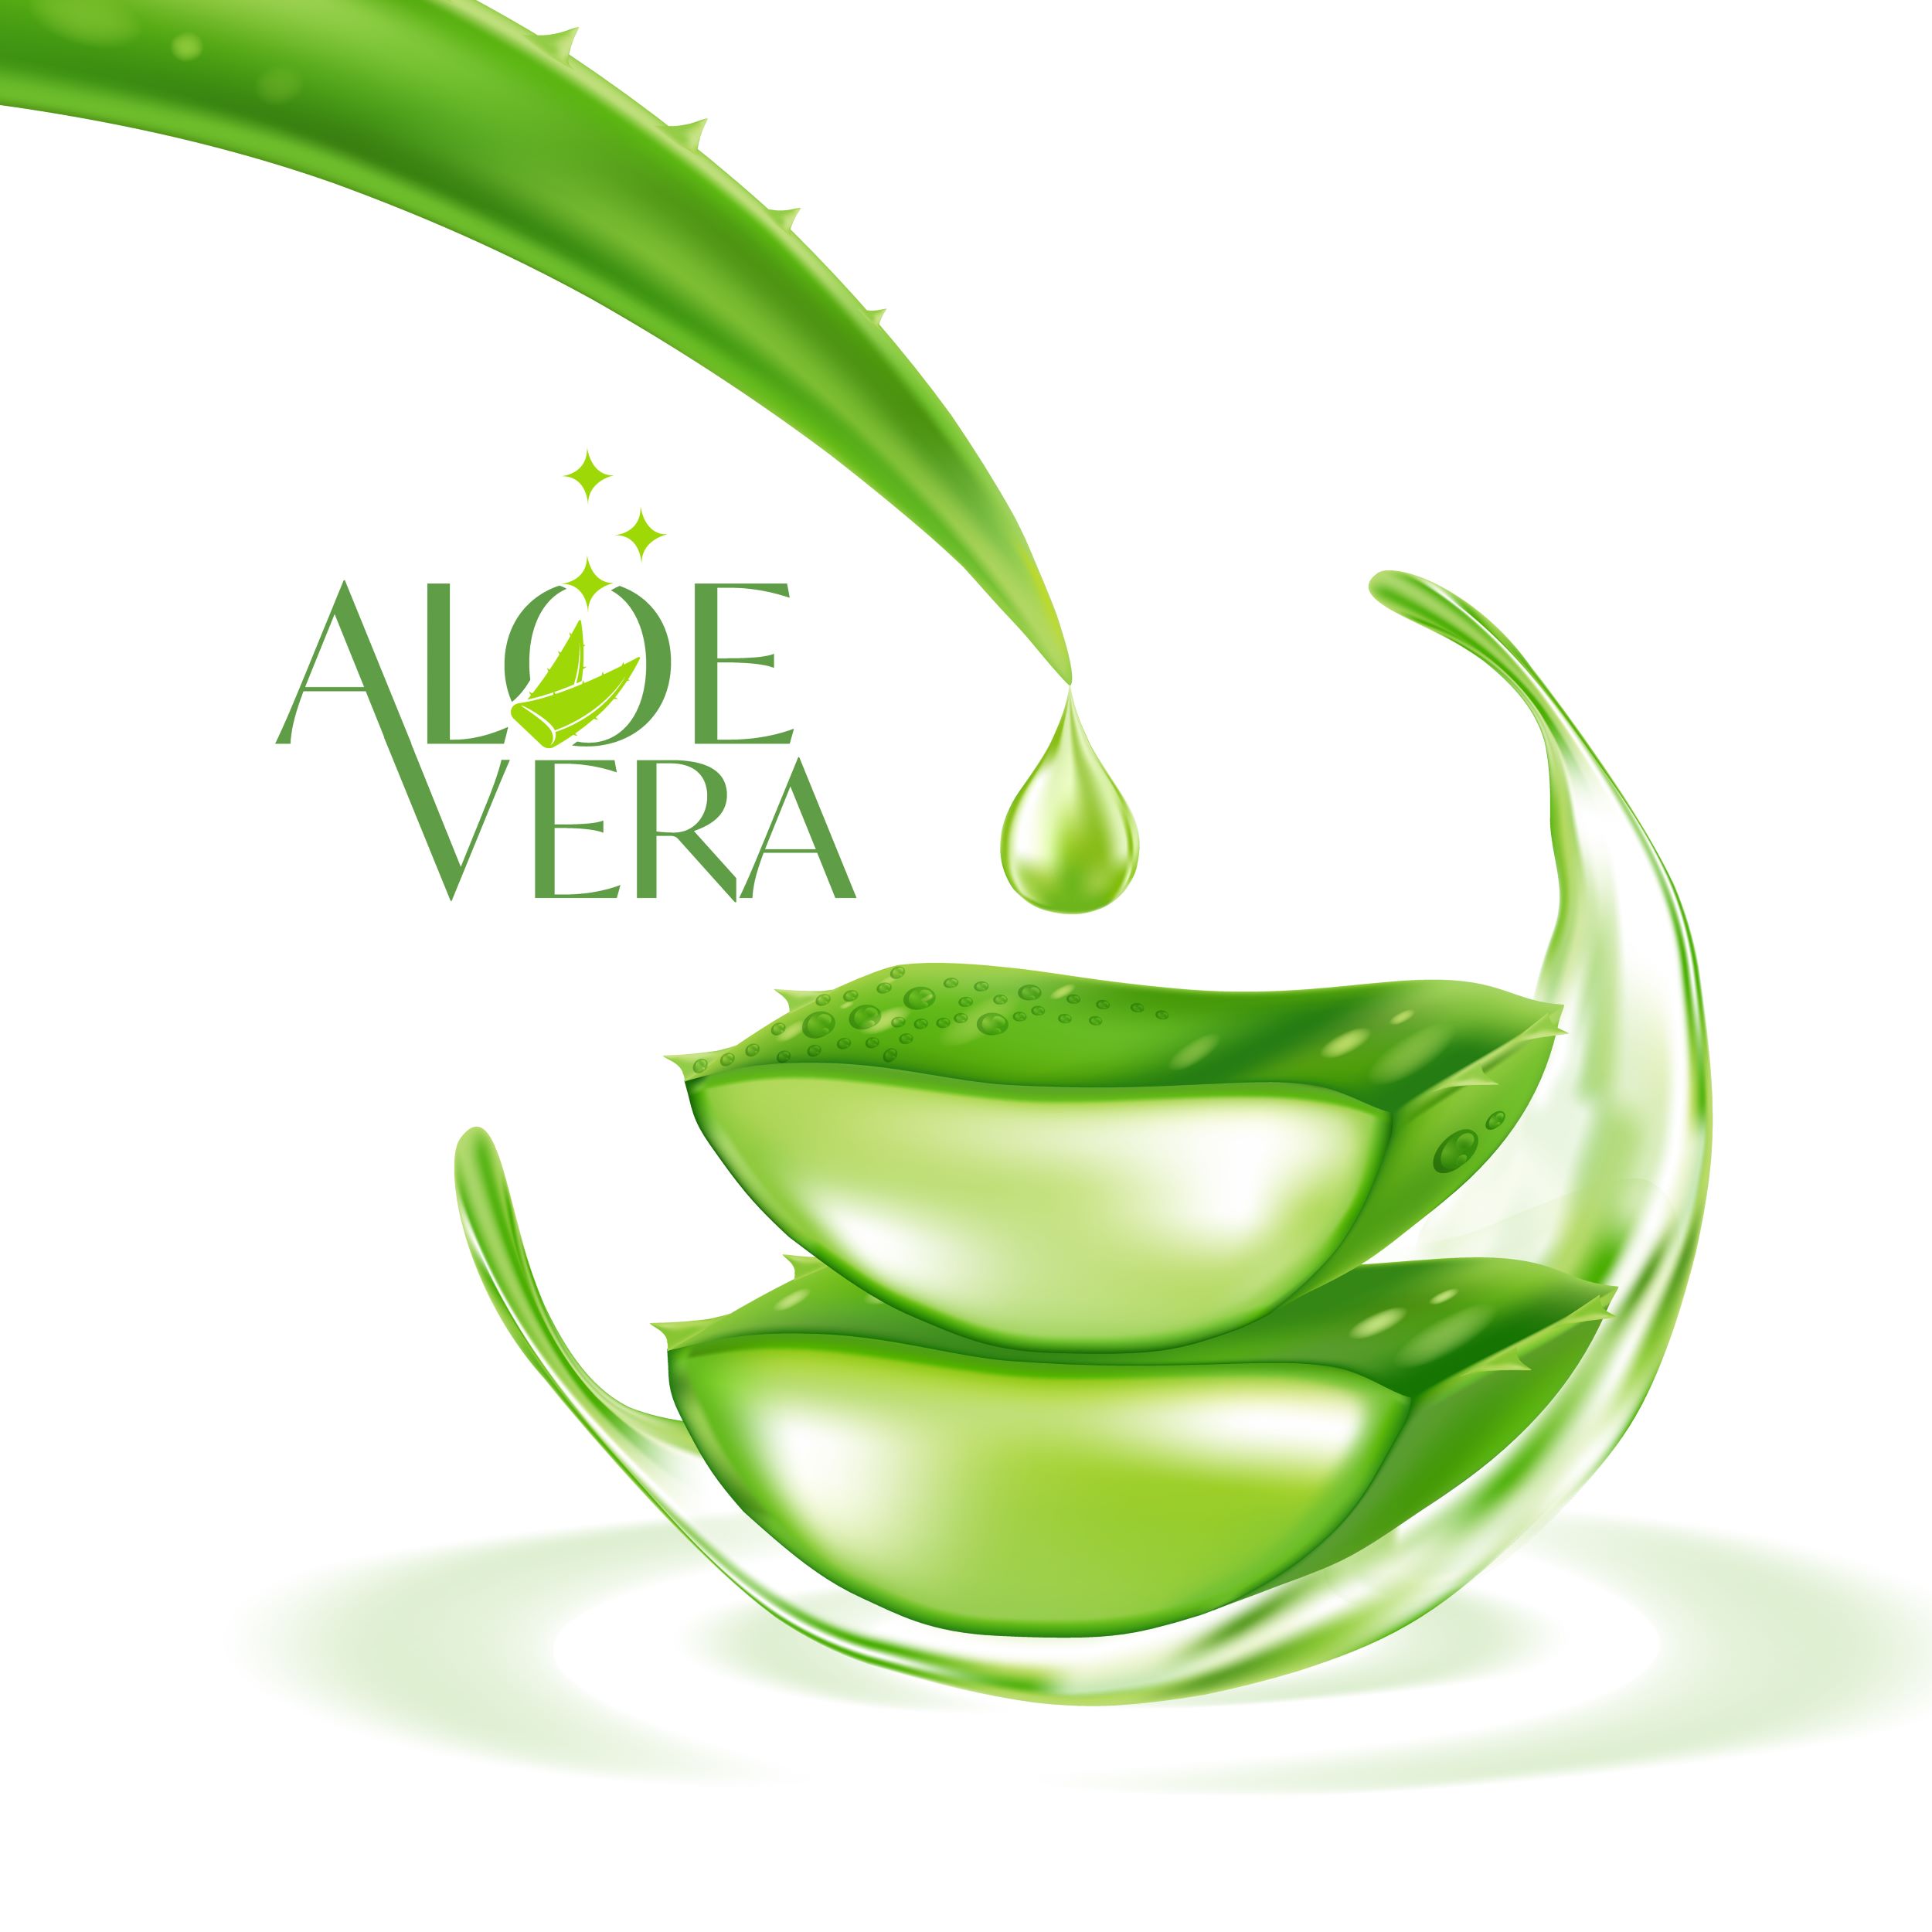 Aloe Vera For Hair Loss The Ayurvedic Home Remedy To Prevent Hair Fall